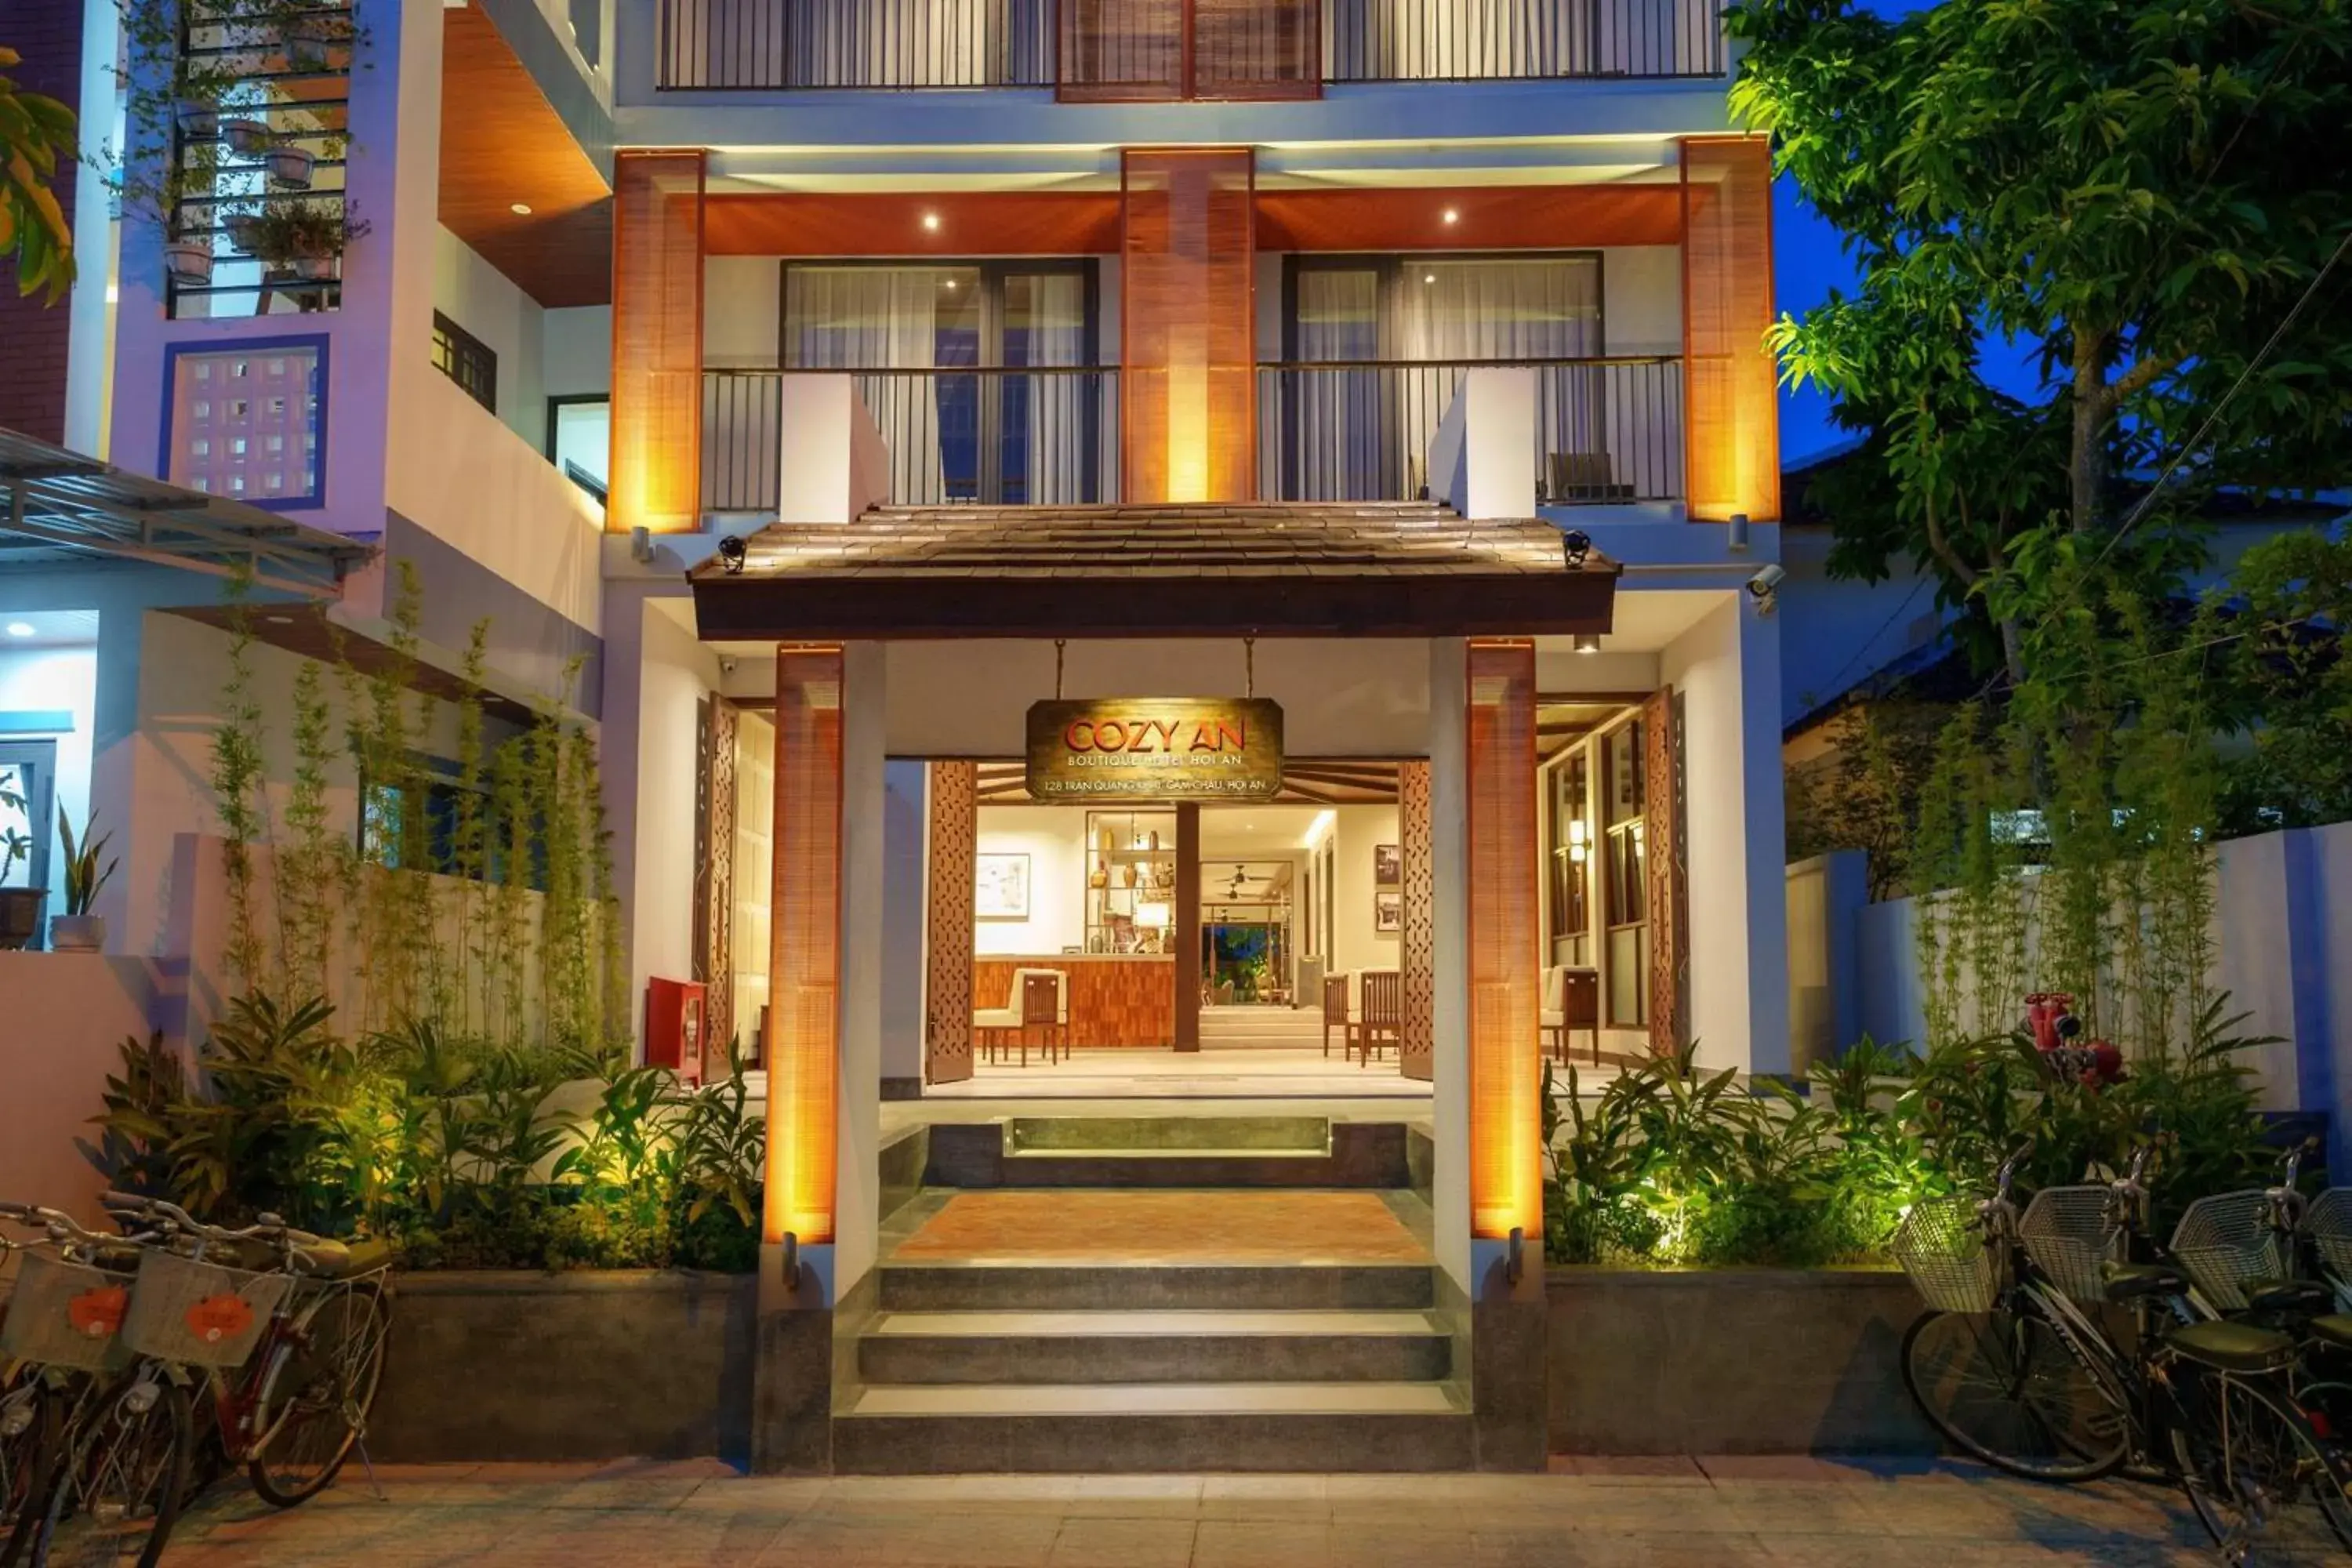 Property building in Cozy An Boutique Hoian Hotel & Spa